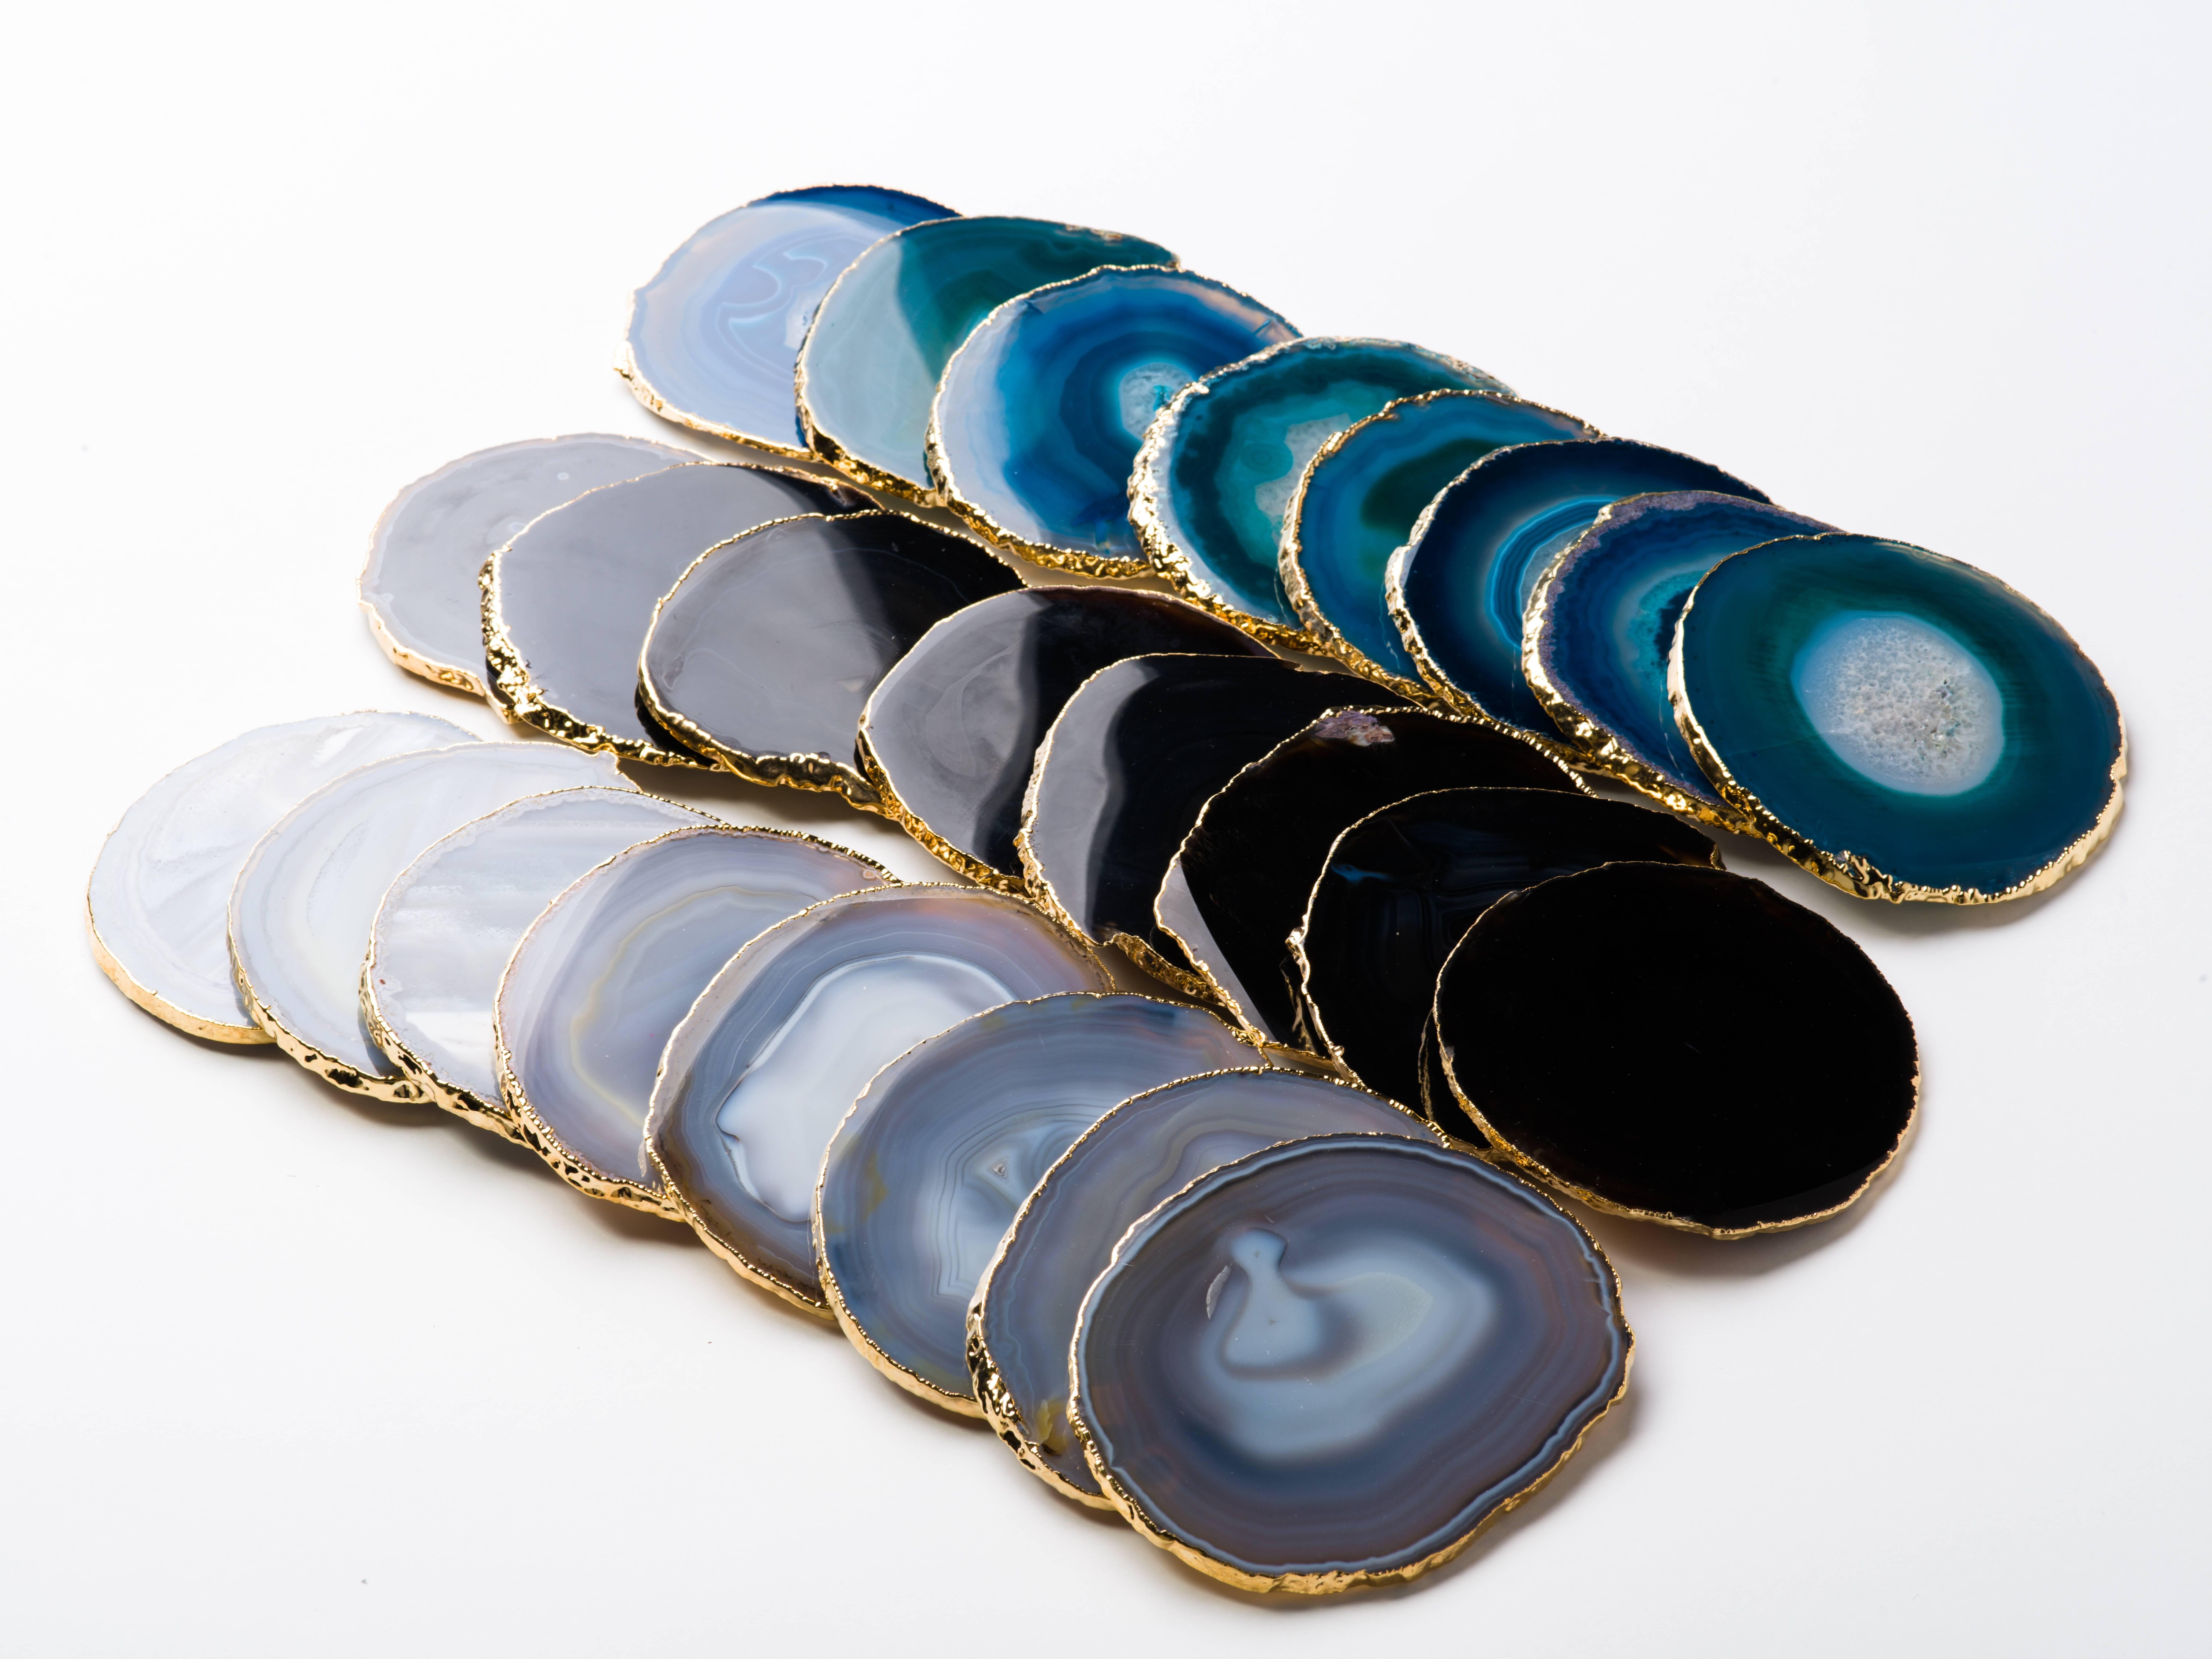 Hand-Crafted Agate Gemstone Coasters Wrapped in 24-Karat Gold, Set / 8 For Sale